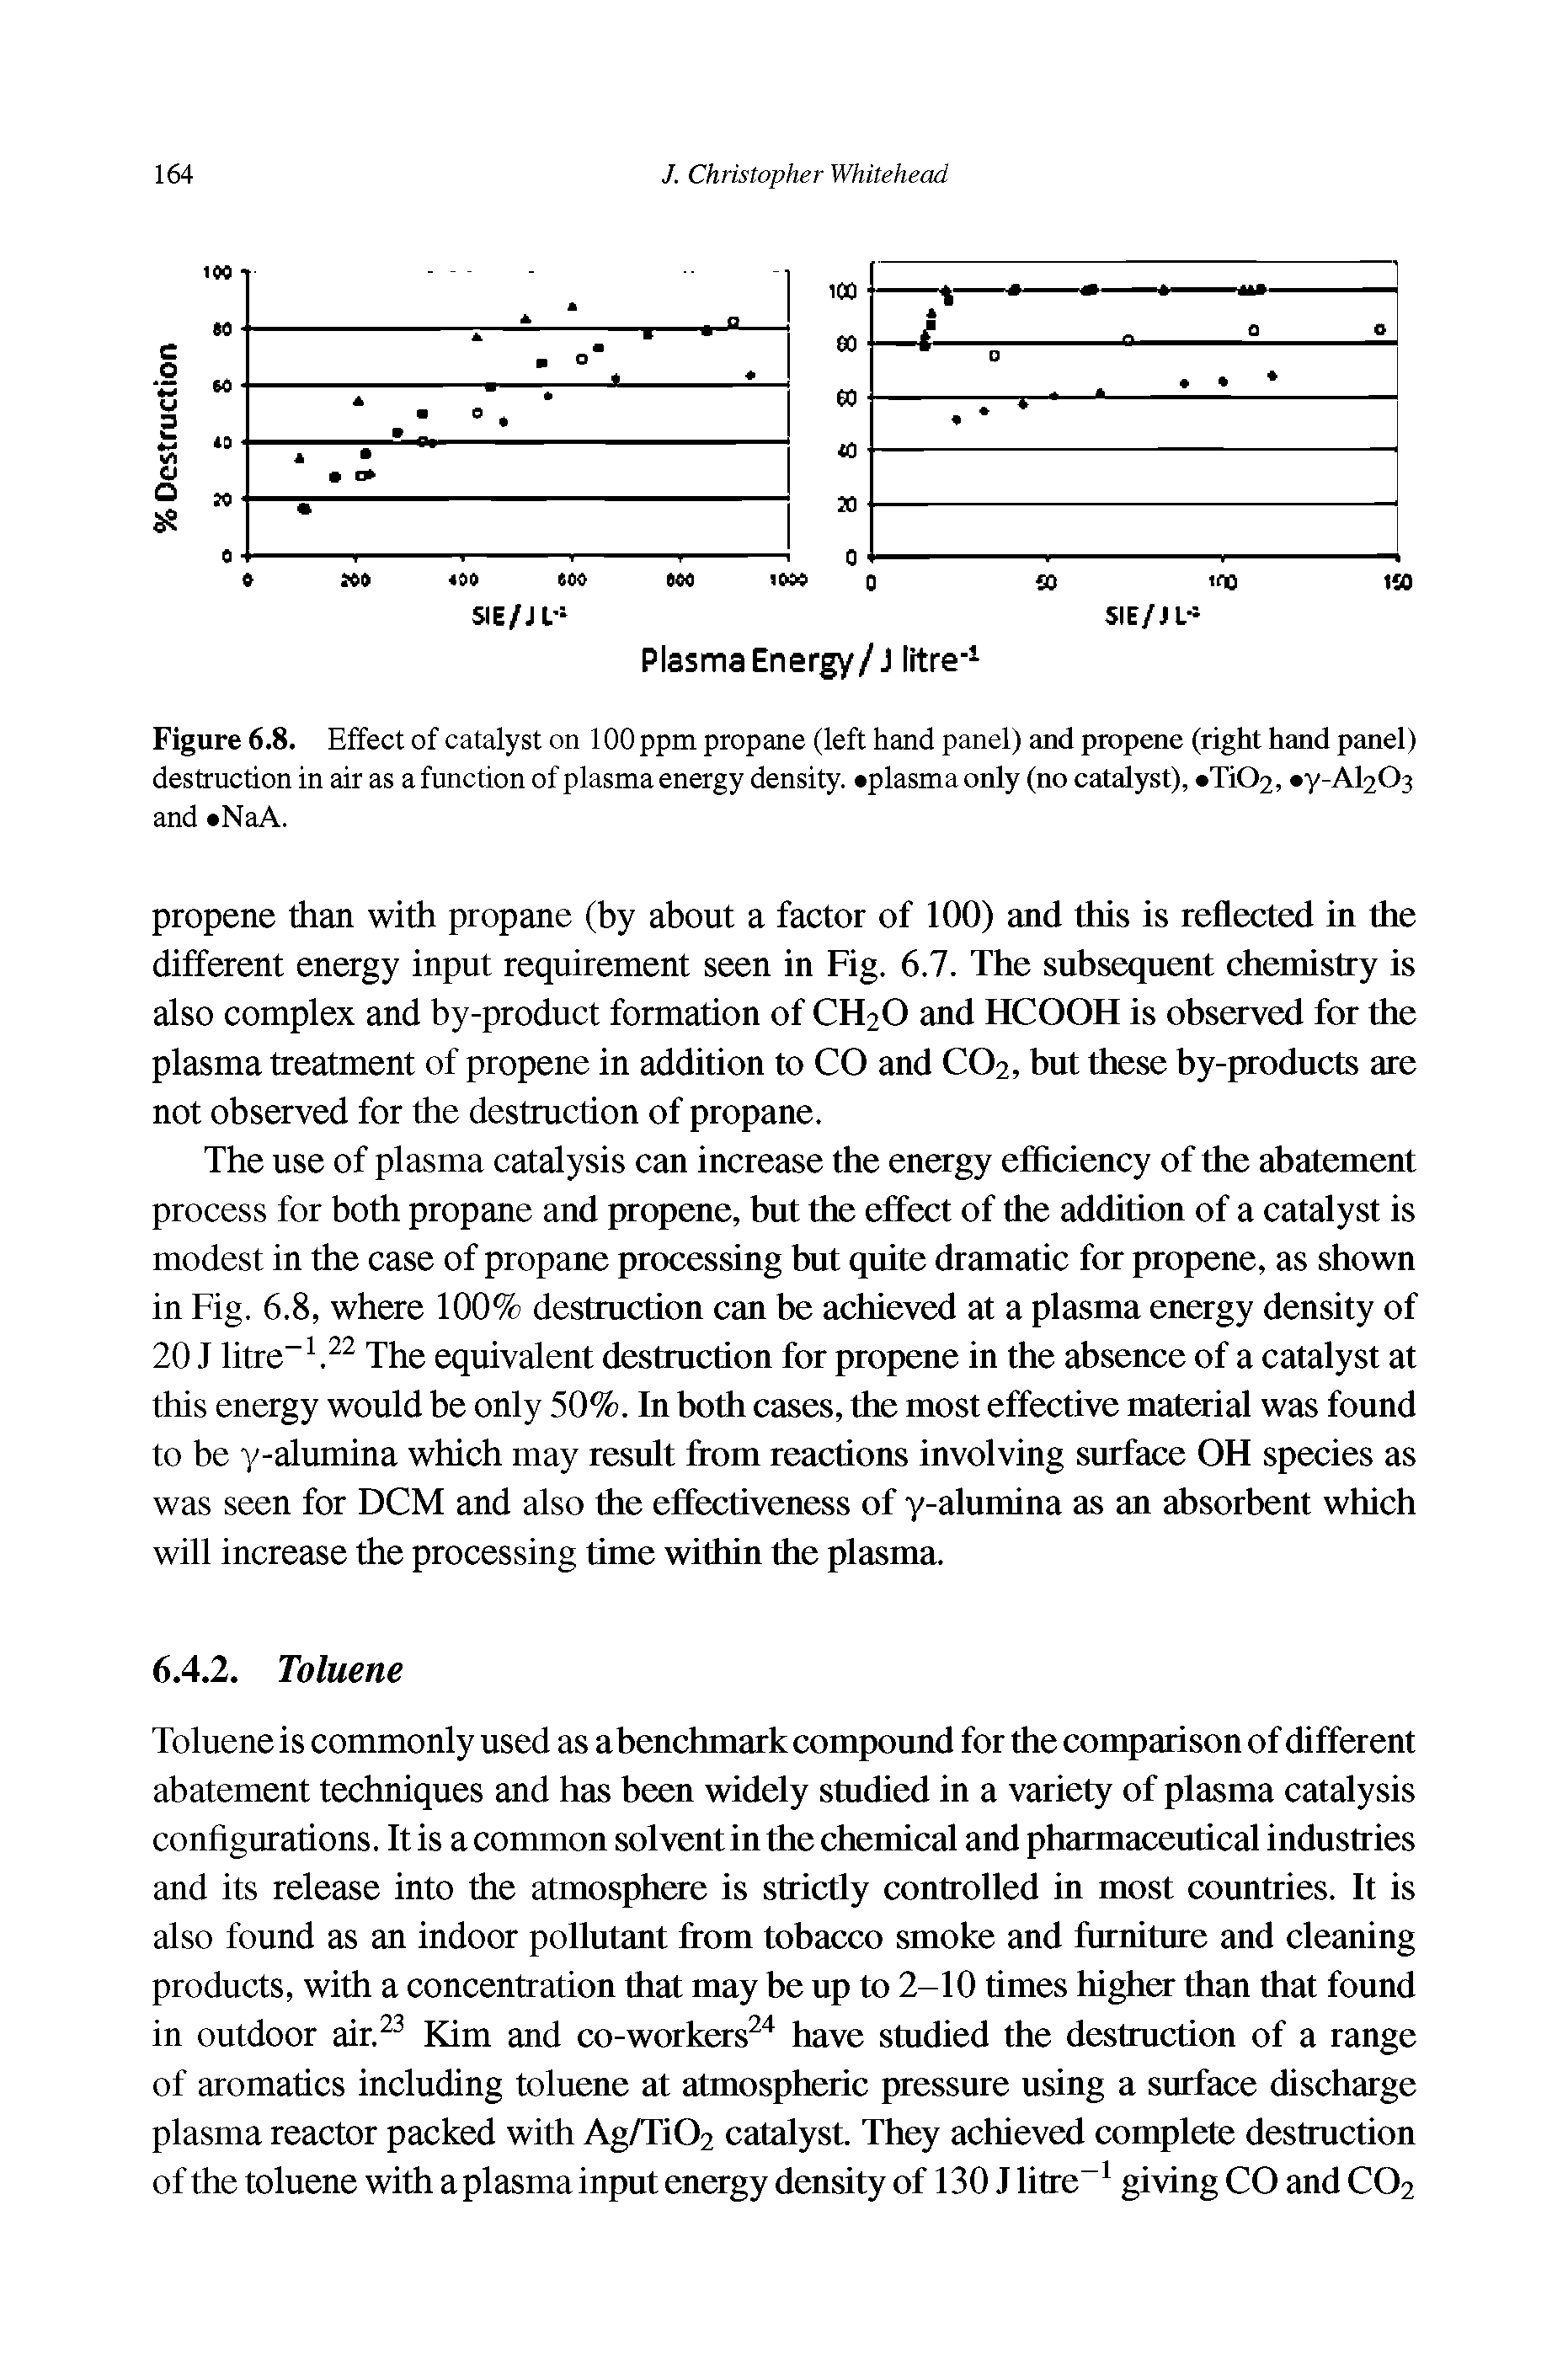 Figure 6.8. Effect of catalyst on 100 ppm propane (left hand panel) and propene (right hand panel) destruction in air as a function of plasma energy density, plasma only (no catalyst), Ti02, y-Al203 and NaA.